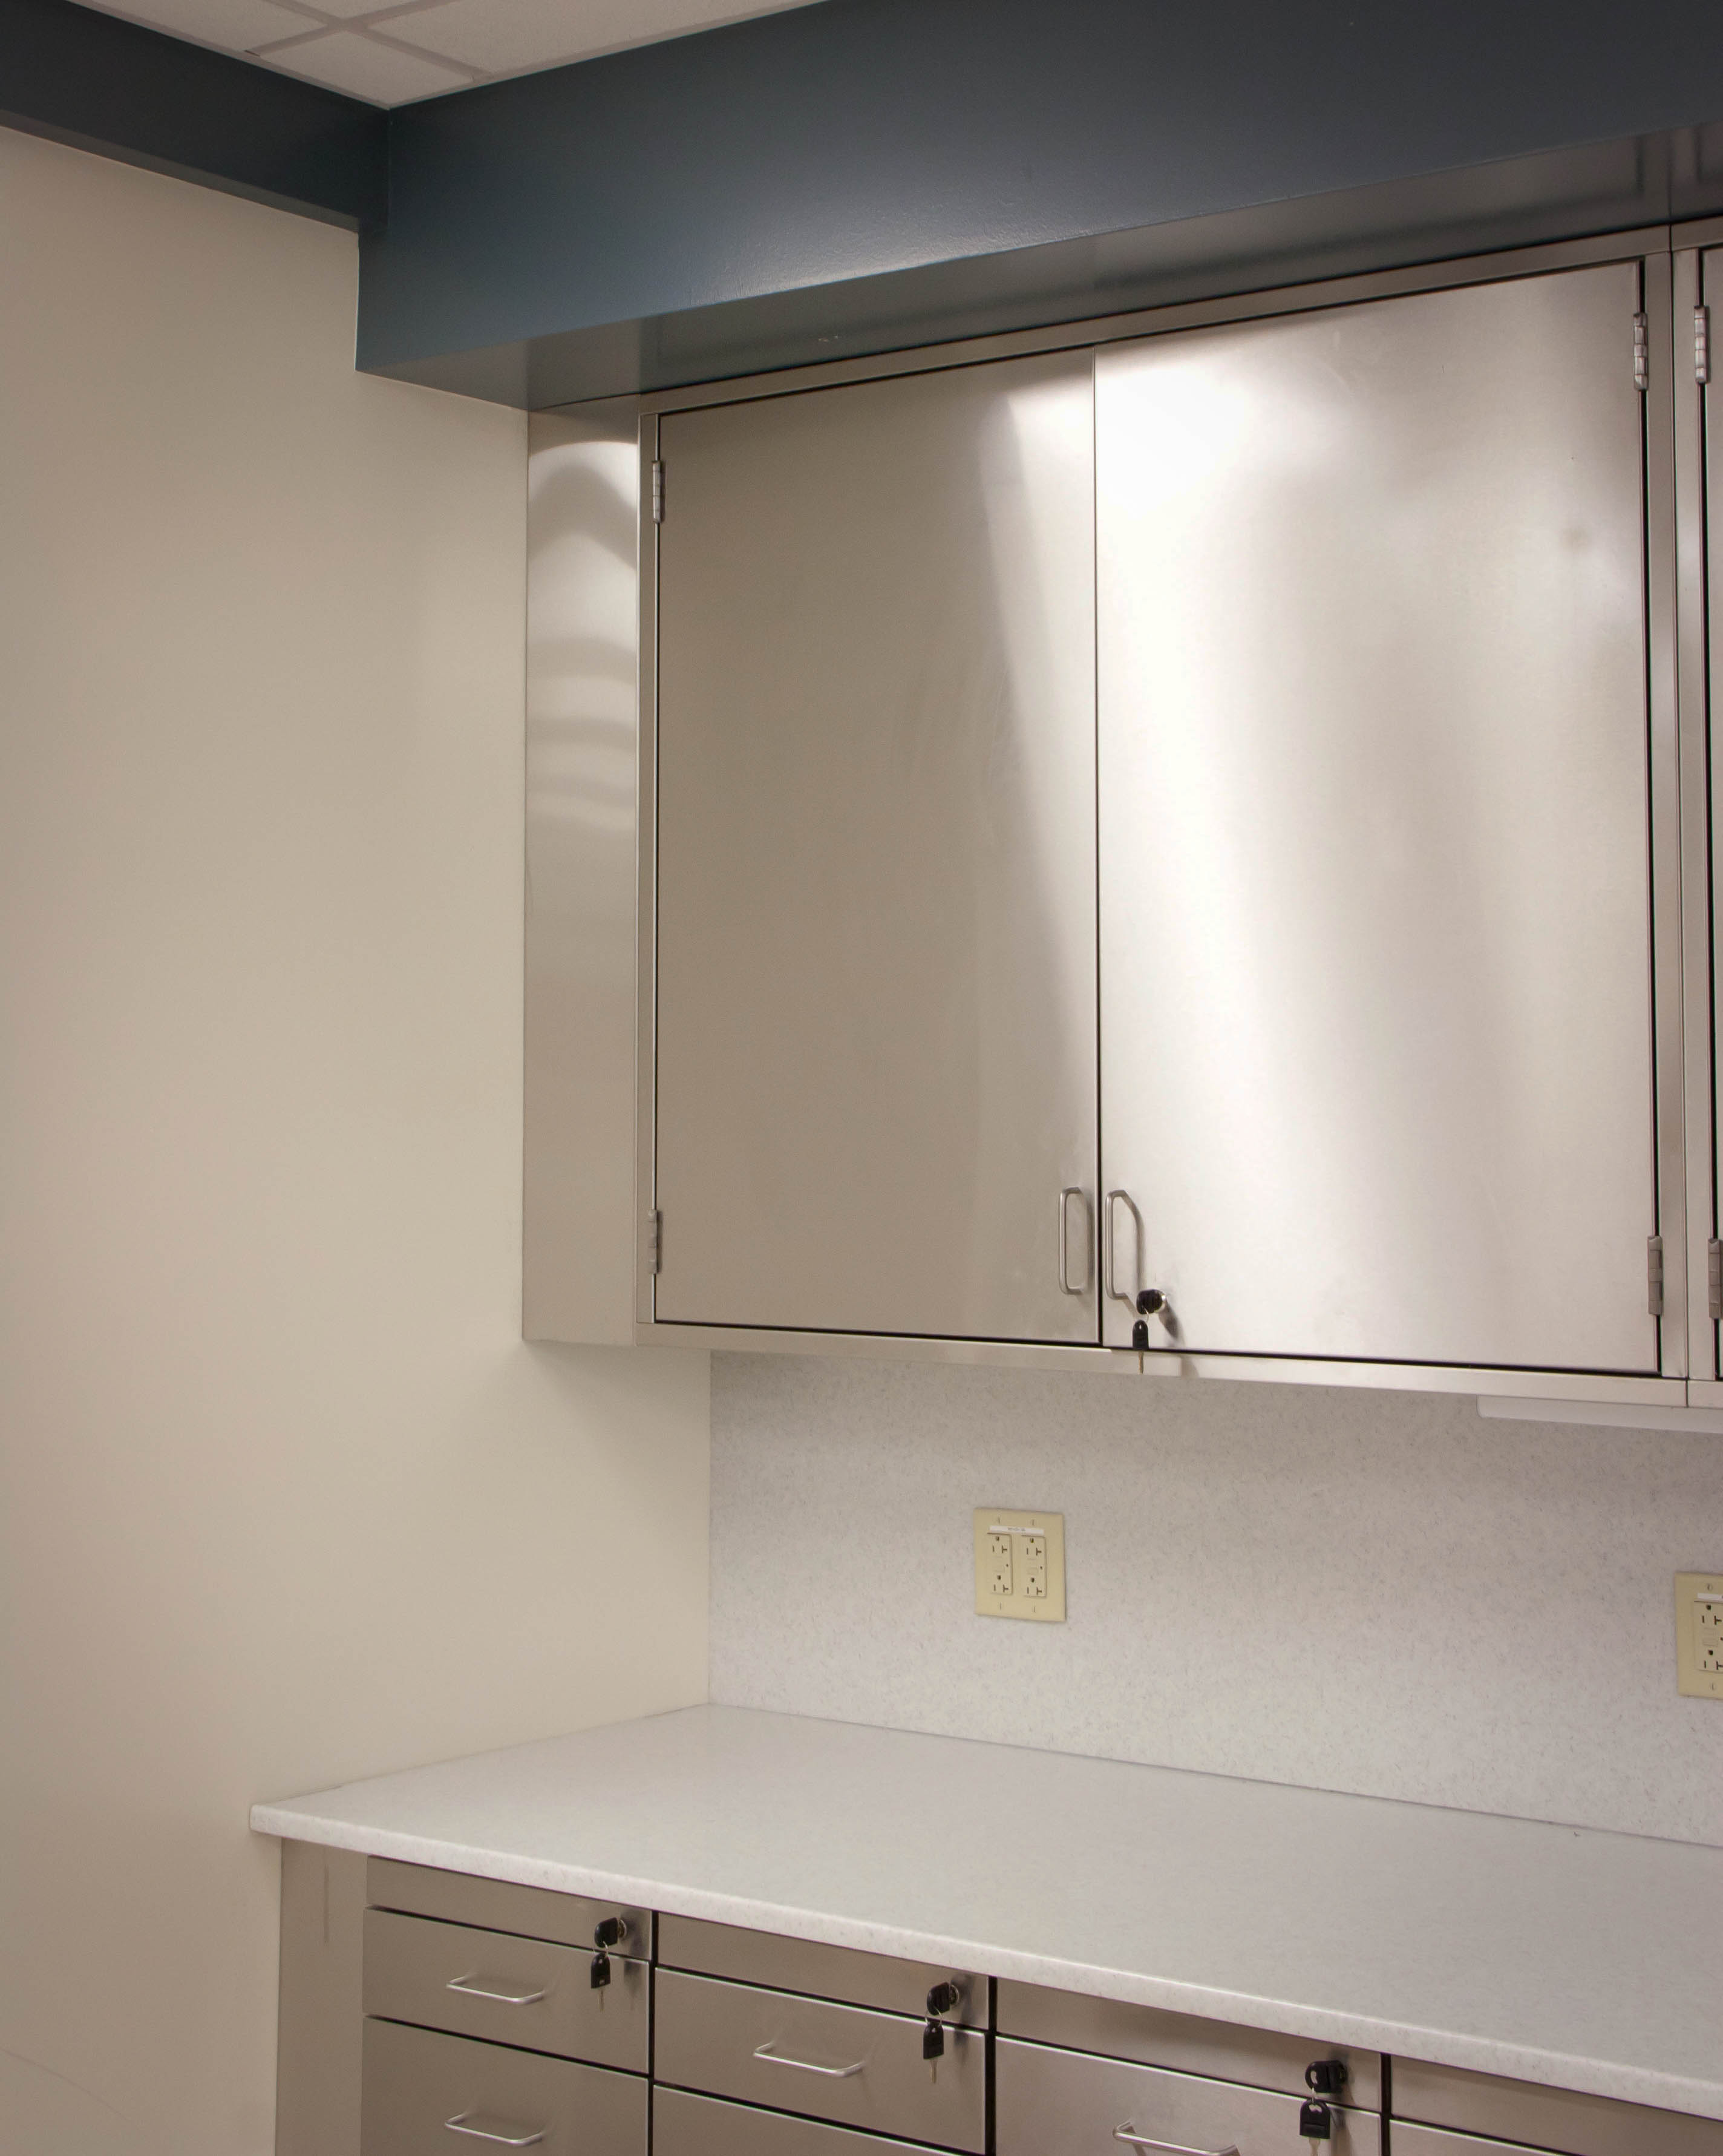 Stainless steel upper wall cabinets